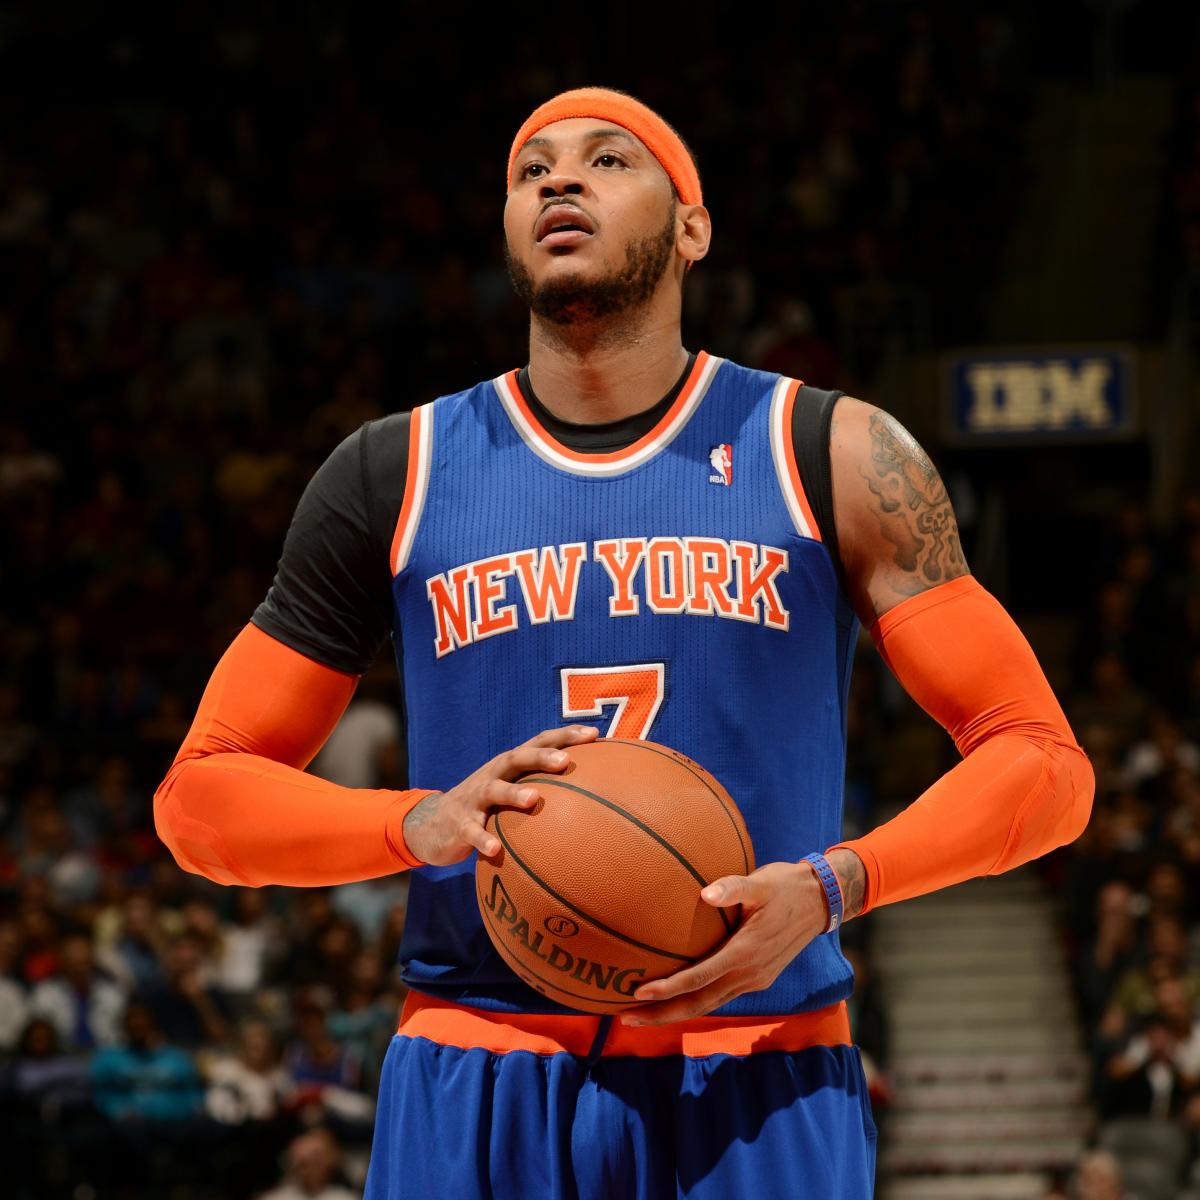 Knicks' Carmelo Anthony to Miss Playoffs for 1st Time in Career News